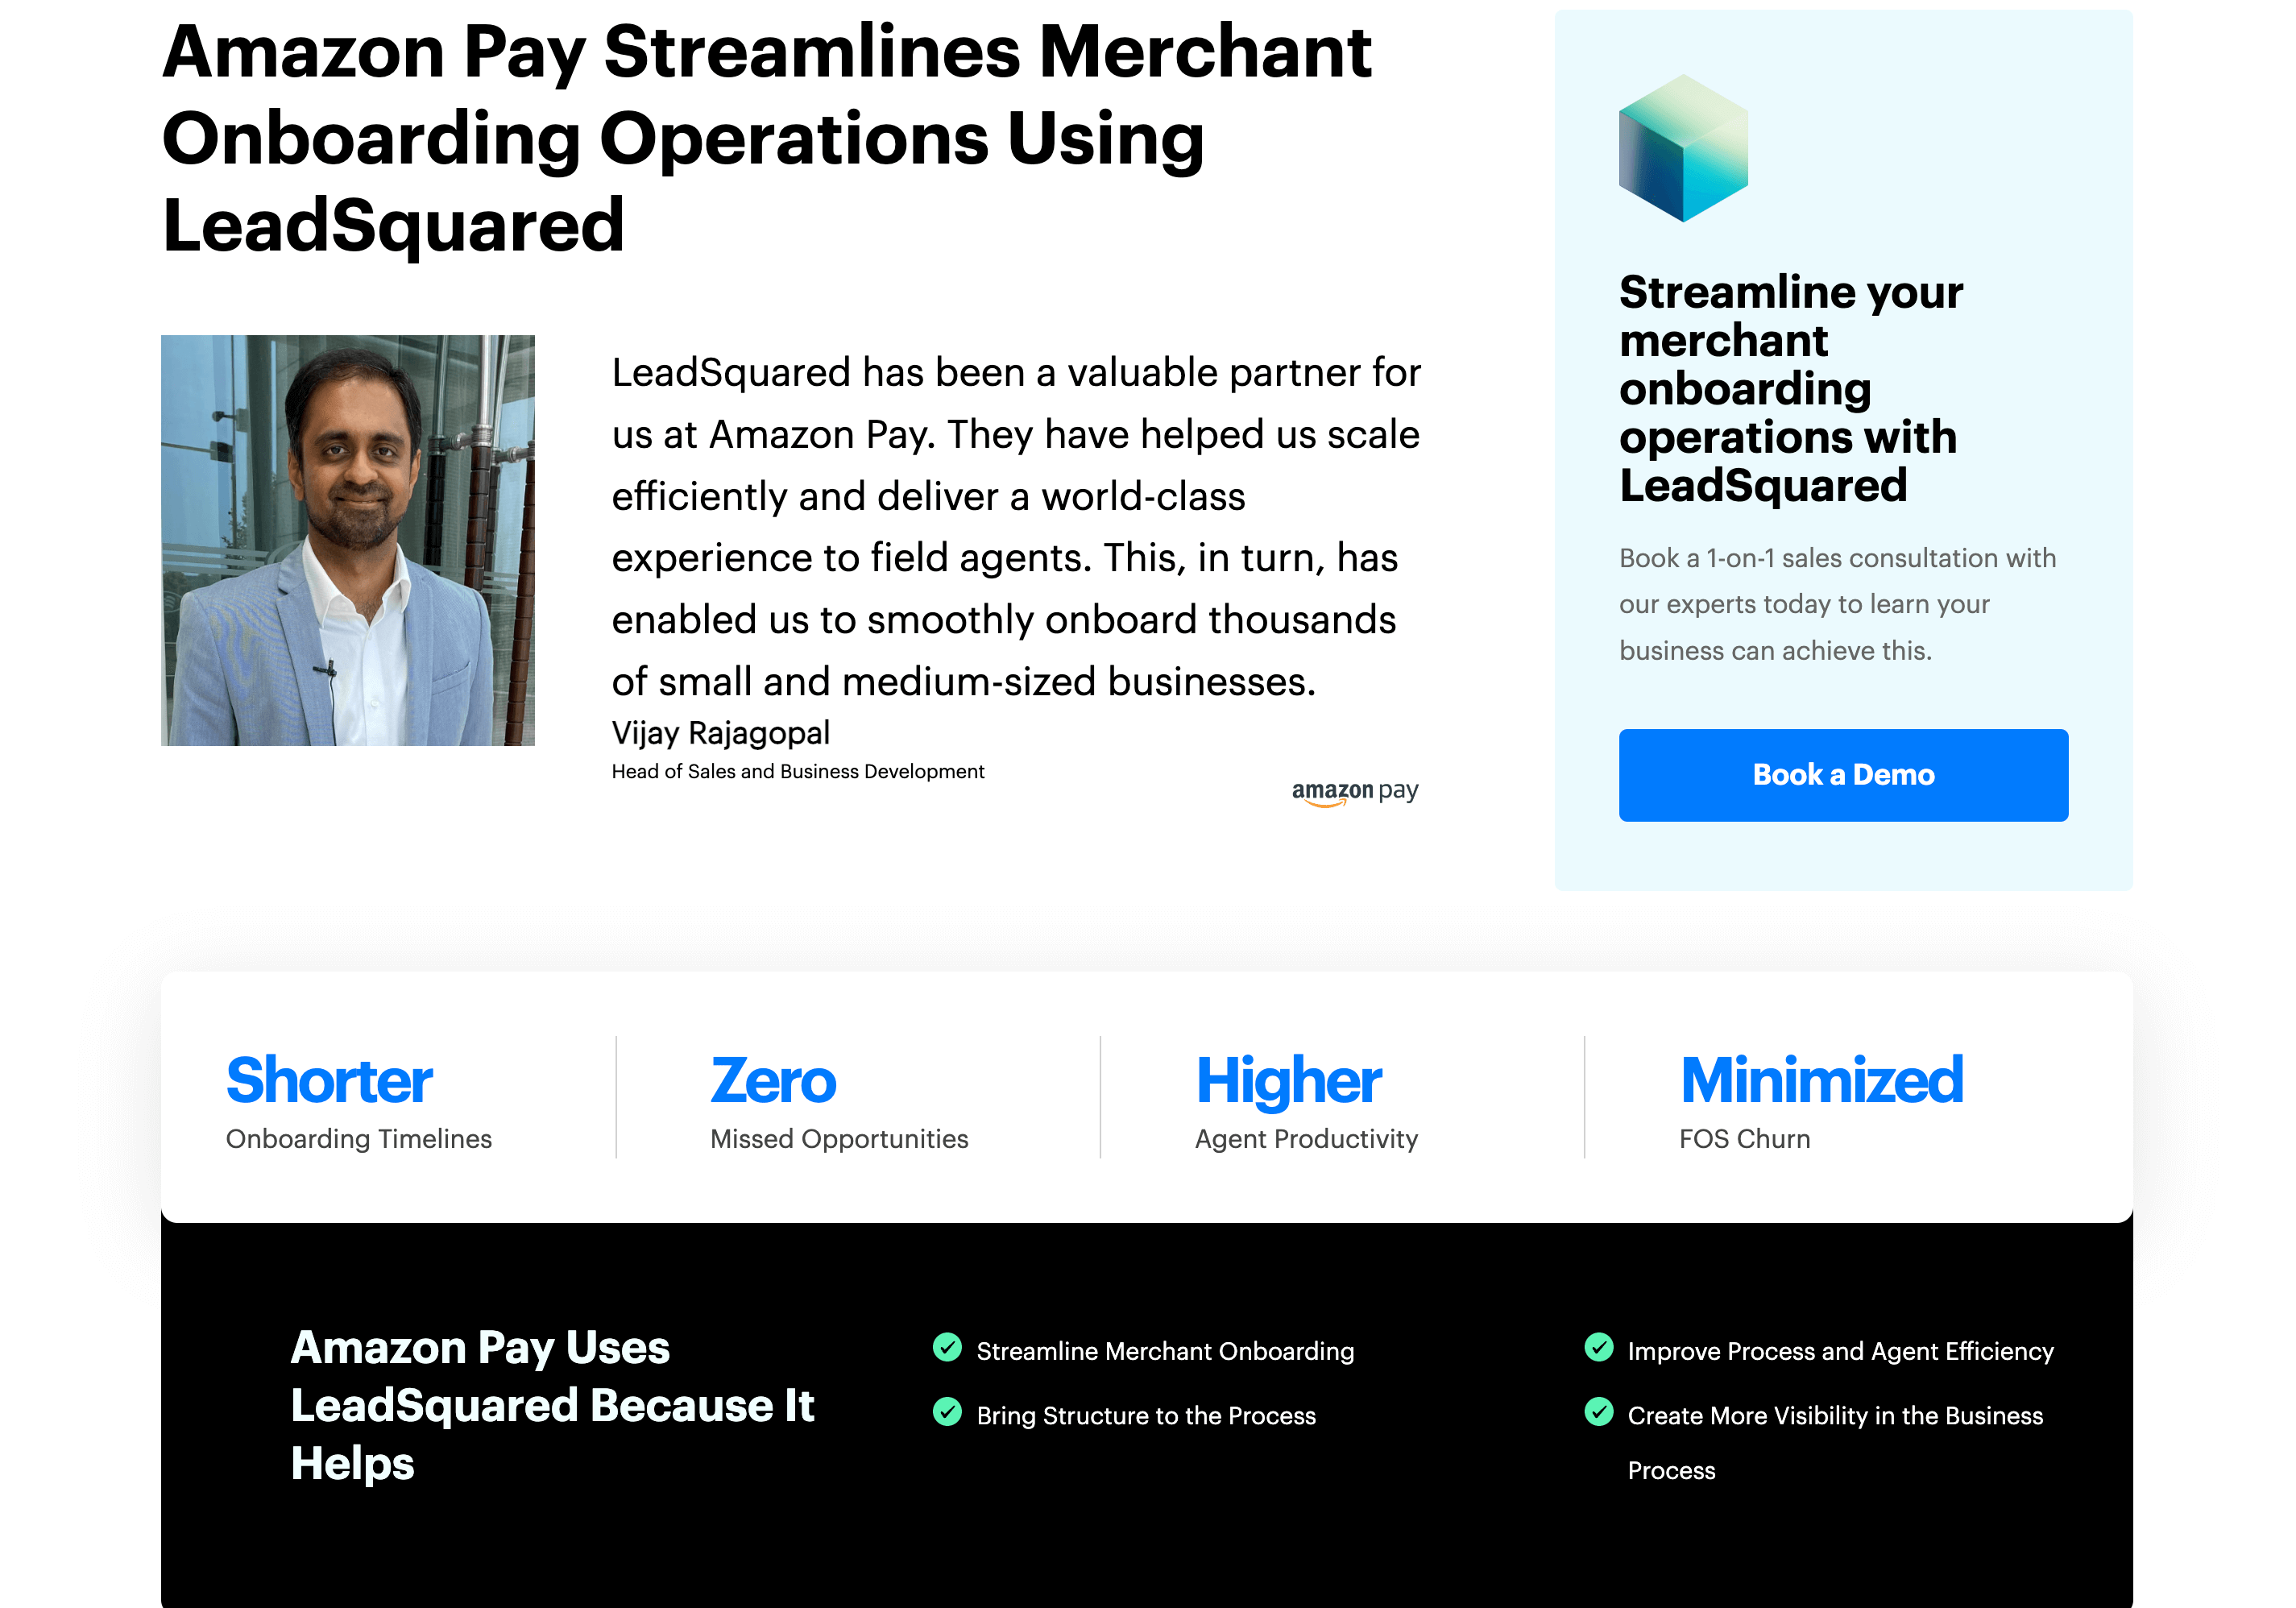 Amazon-Pay-Streamlines-Merchant-Onboarding-Operations-LeadSquared (1)